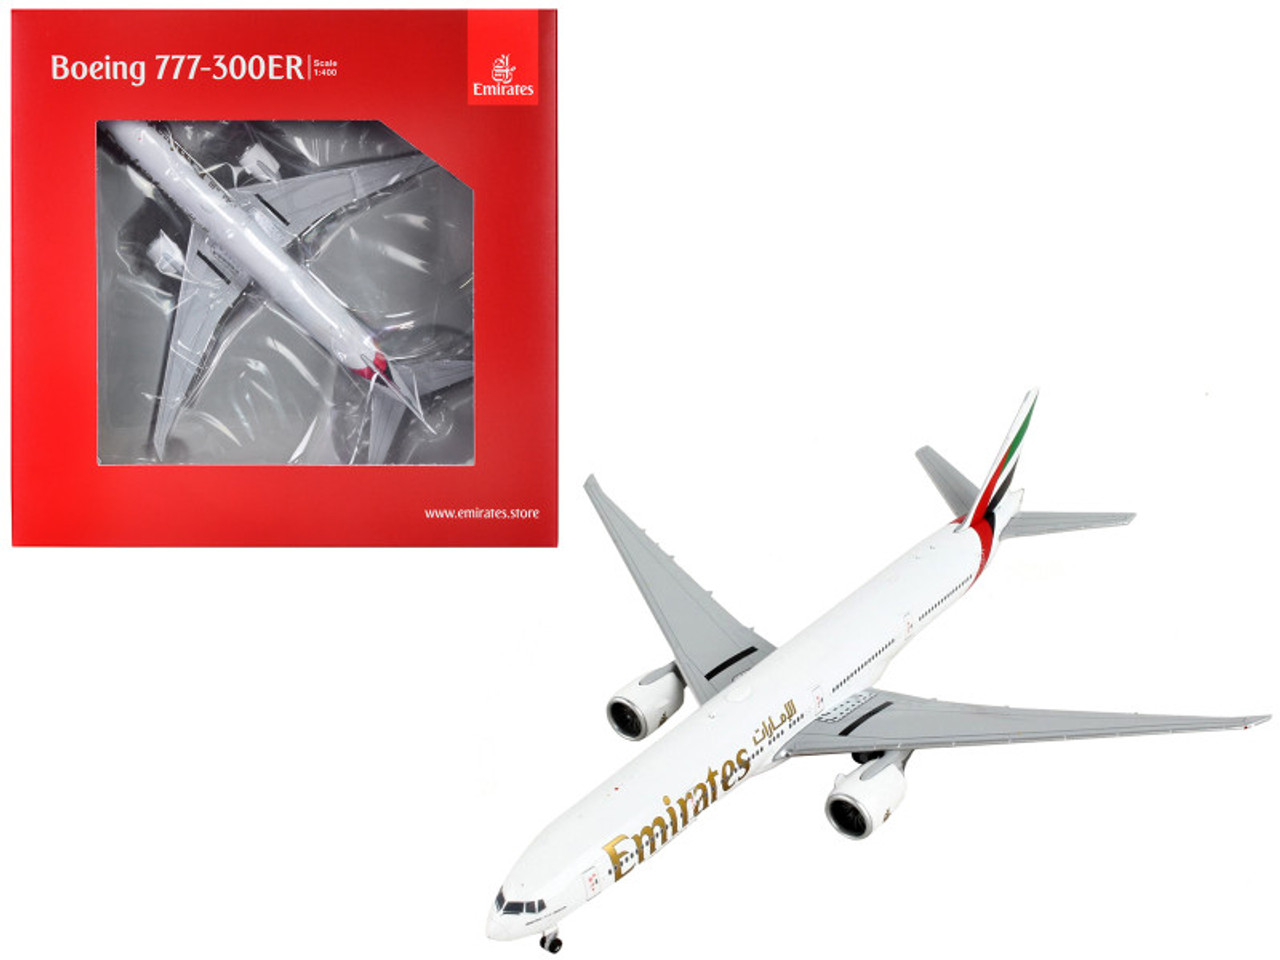 Boeing 777-300ER Commercial Aircraft "Emirates Airlines" White with Striped Tail 1/400 Diecast Model Airplane by GeminiJets